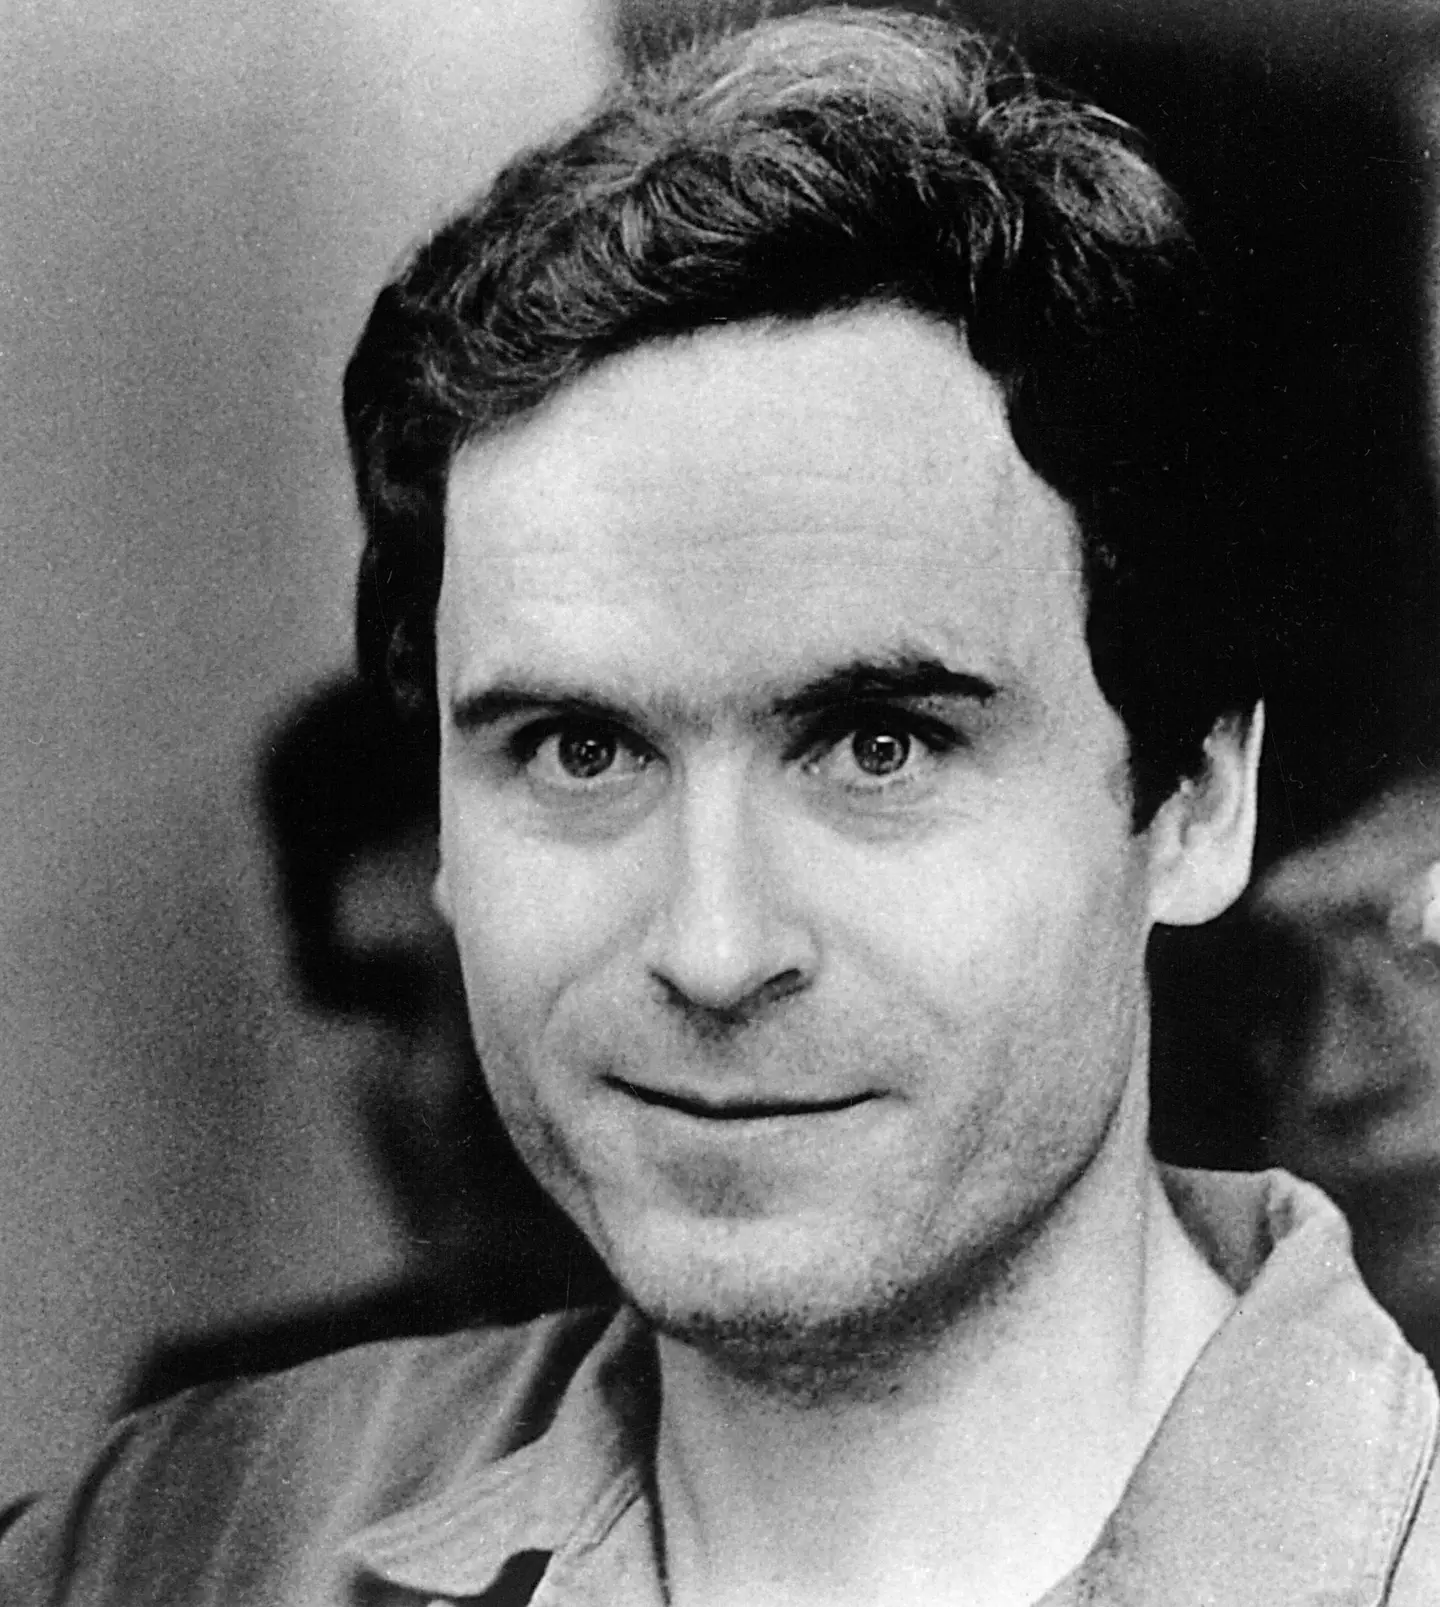 Why are we fascinated by people like Ted Bundy?